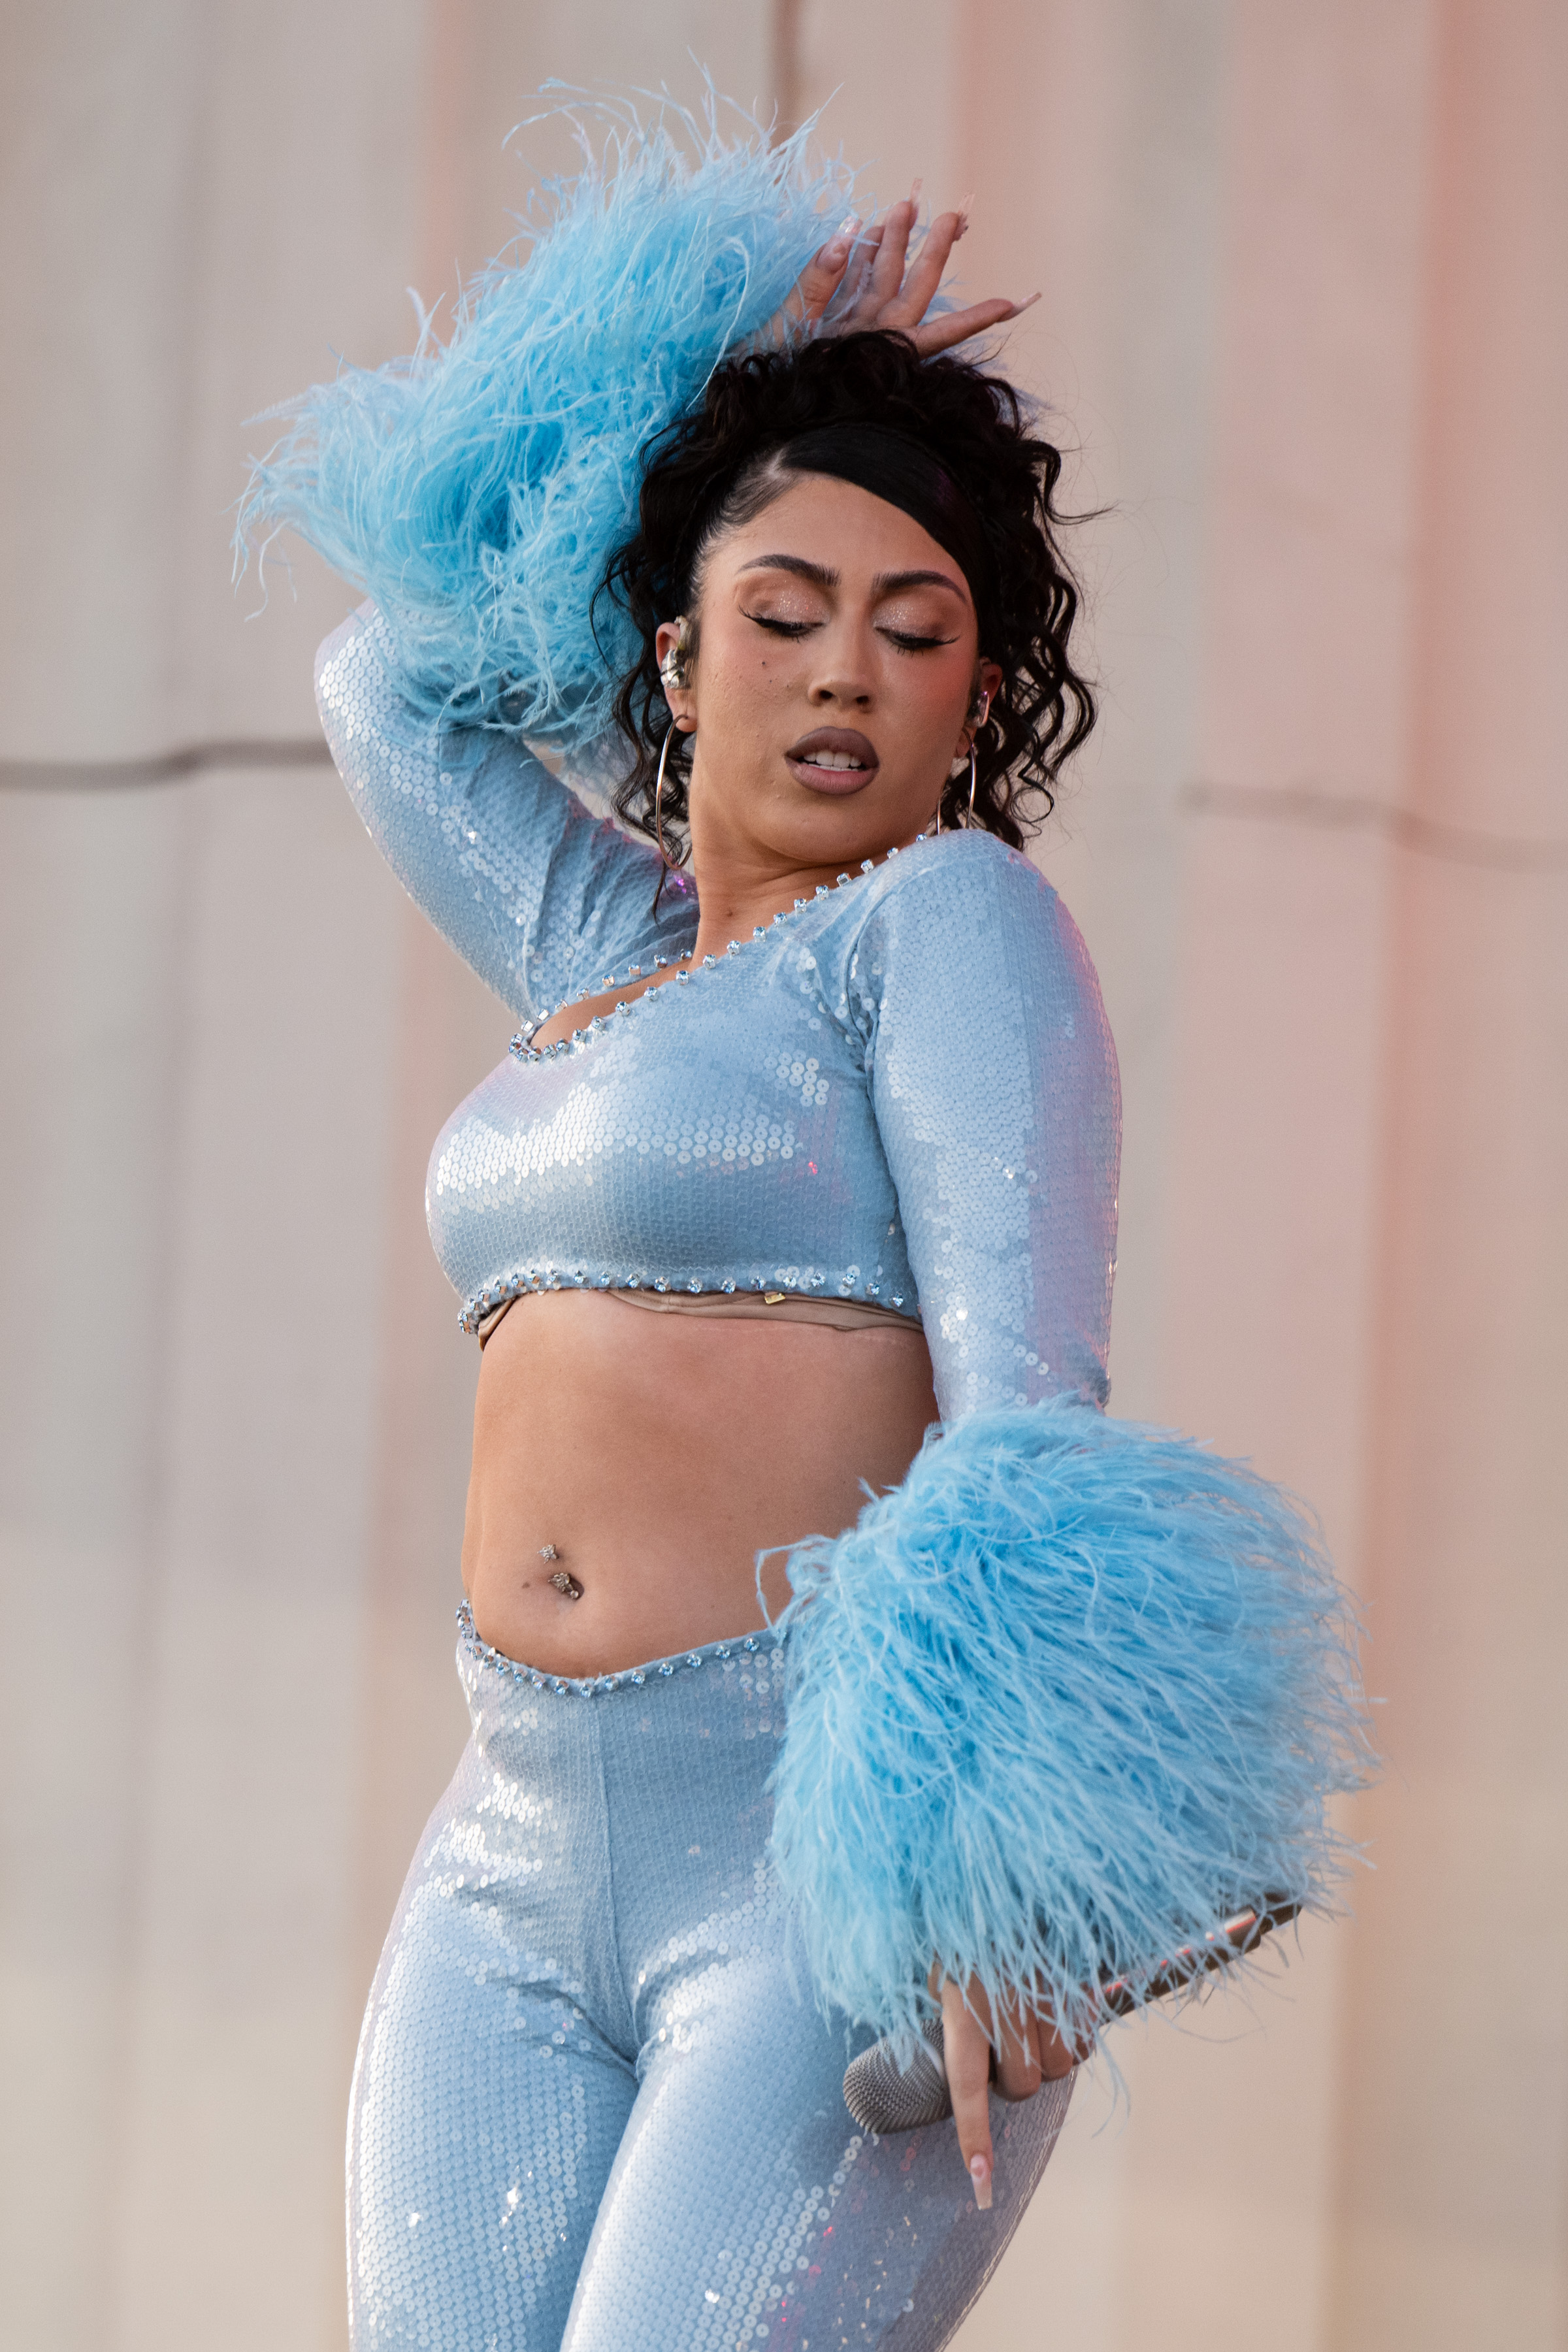 Kali Uchis performing at Coachella Valley Music and Arts Festival on April 23, 2023, in Indio, California. | Source: Getty Images